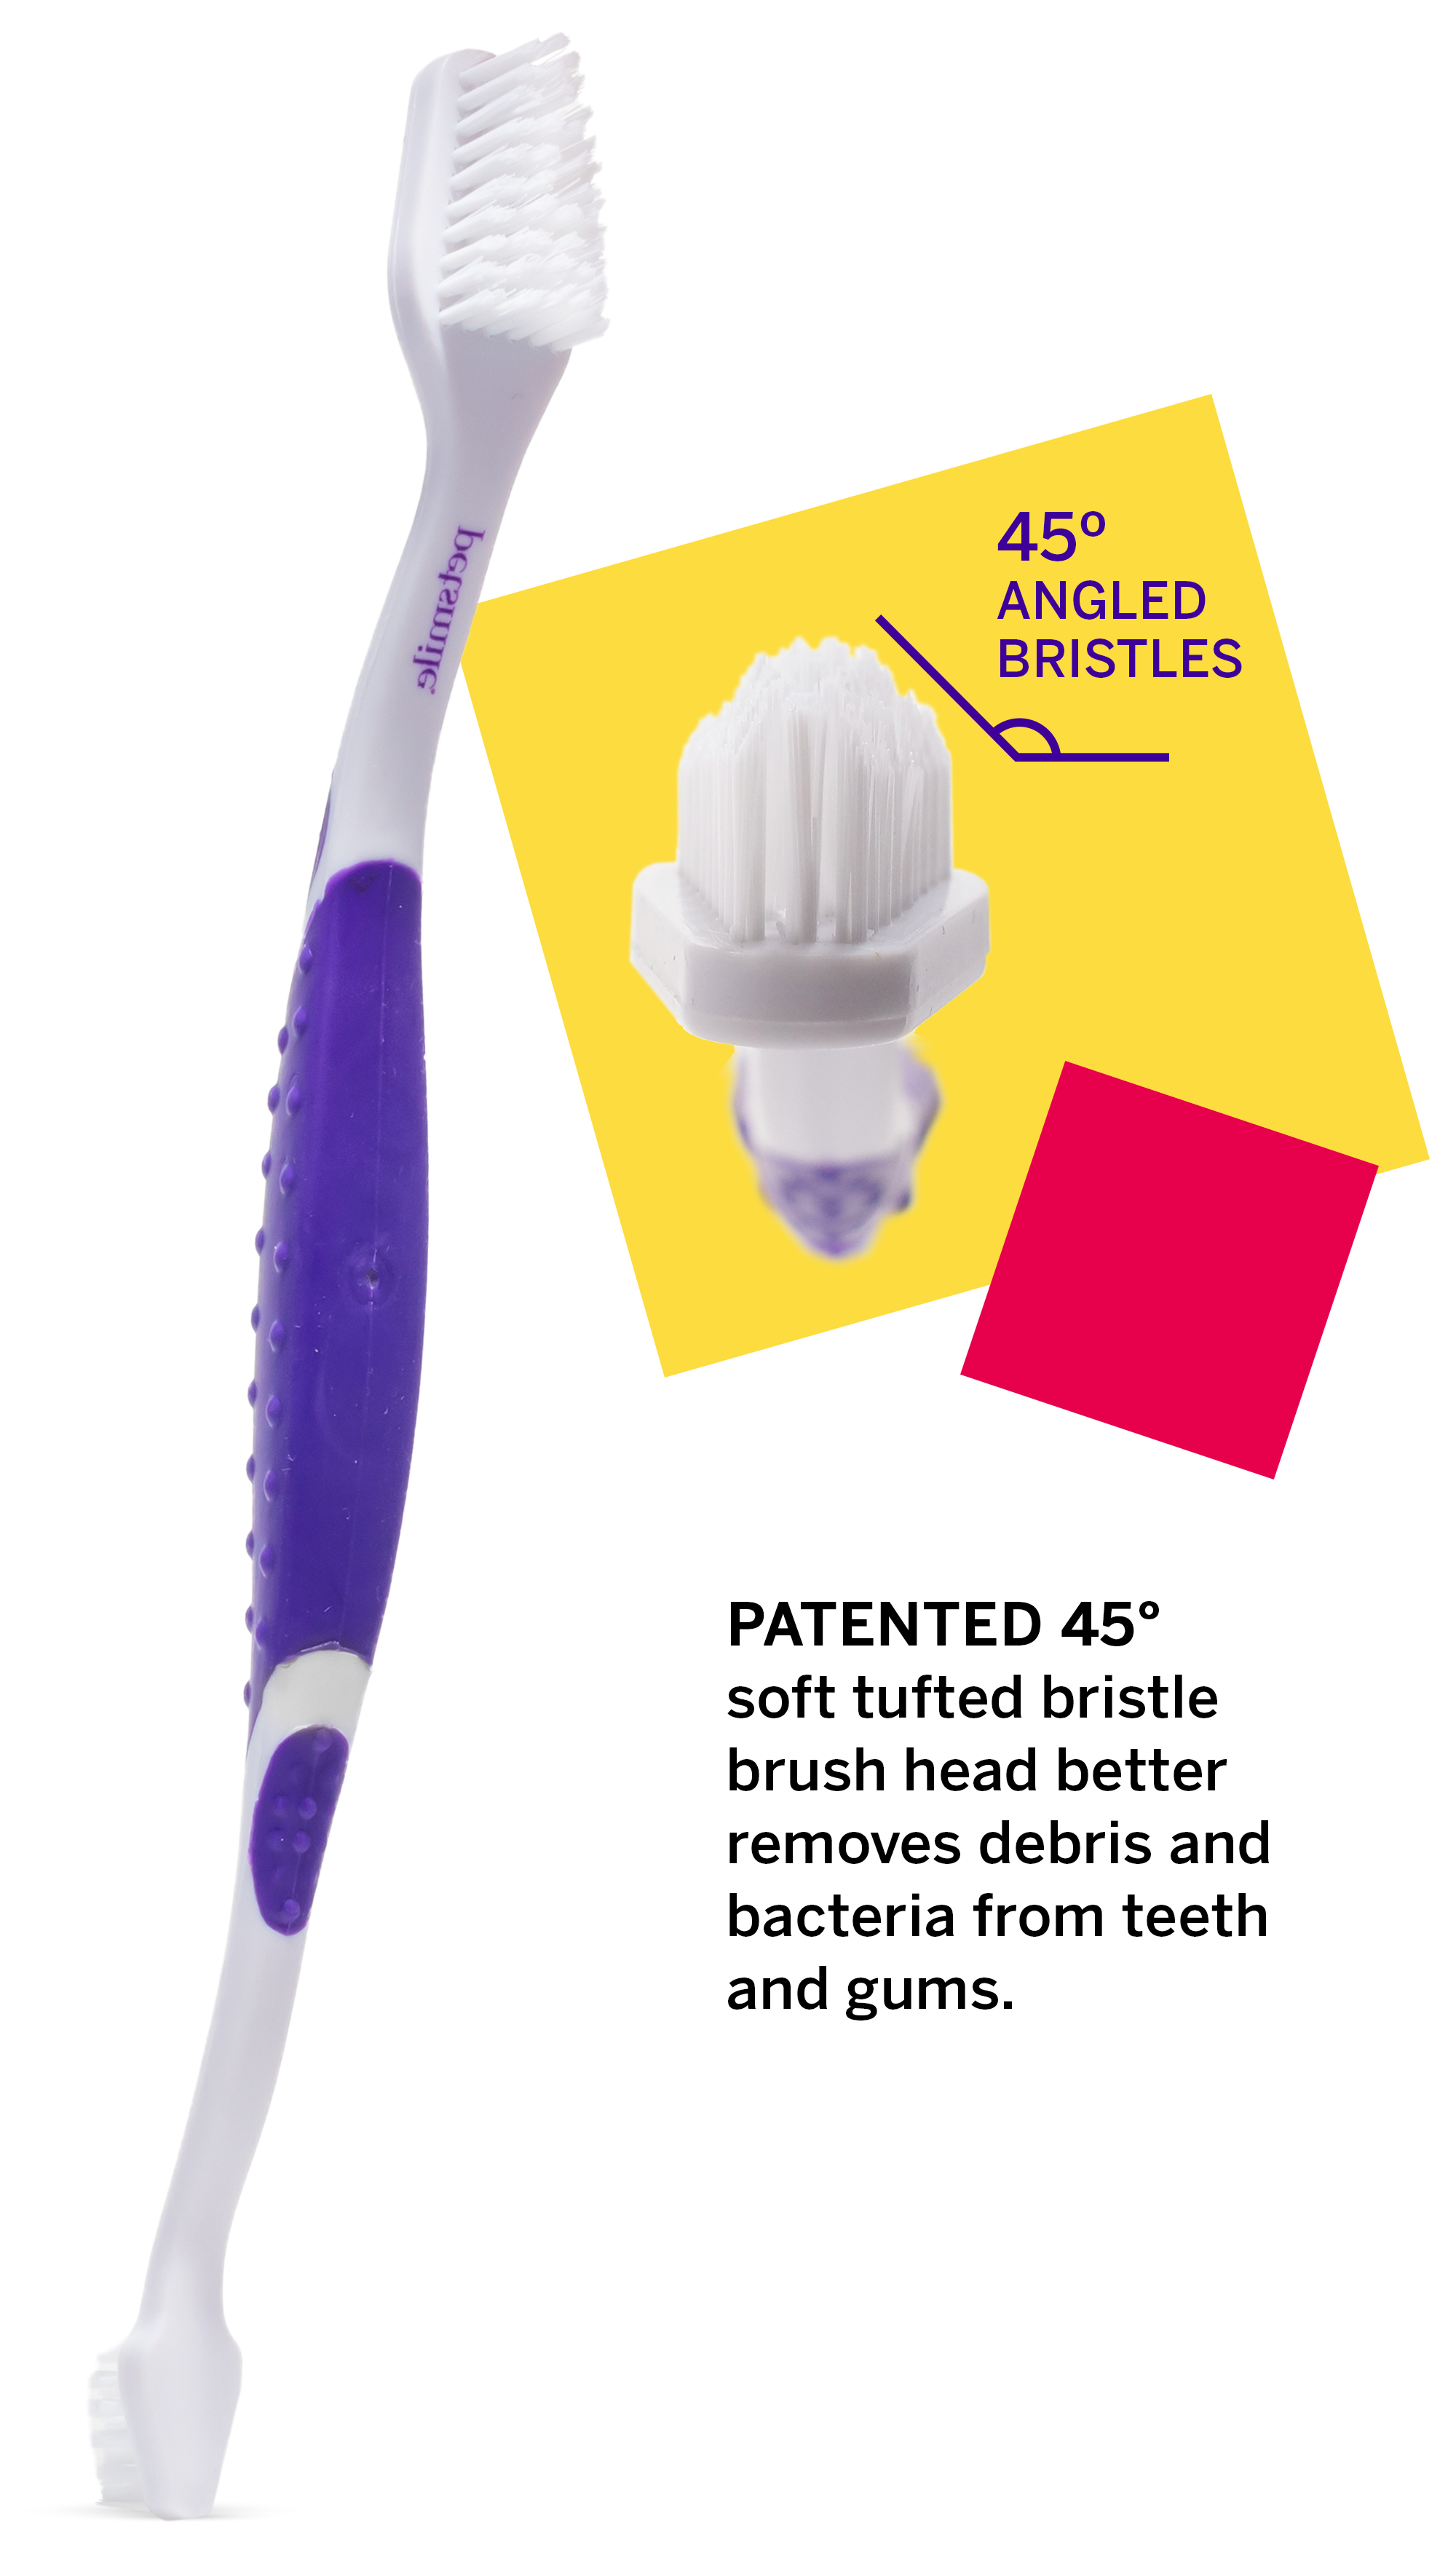 Dual-sided brush cleans teeth and gums , Purple toothbrush with 45-degree angle , petmsile toothbrush removes bacteria from cats mouth , petsmile London broil flavor Large tube , Large purple tube of cat toothpaste